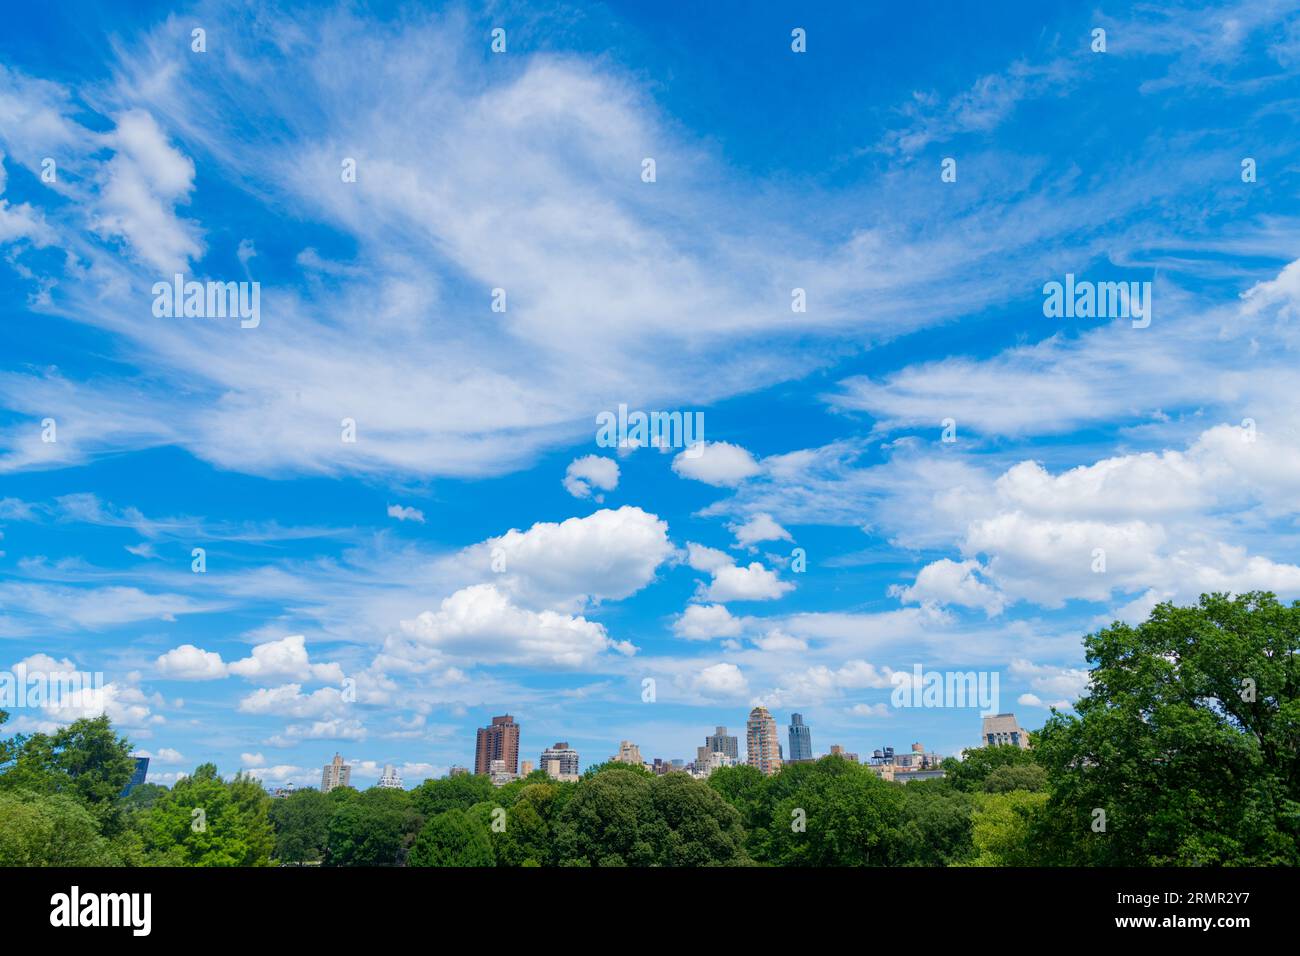 city nature landscape with skyscraper. central park of new york. Central Park summer and building in midtown Manhattan New York City. USA, New York Ci Stock Photo